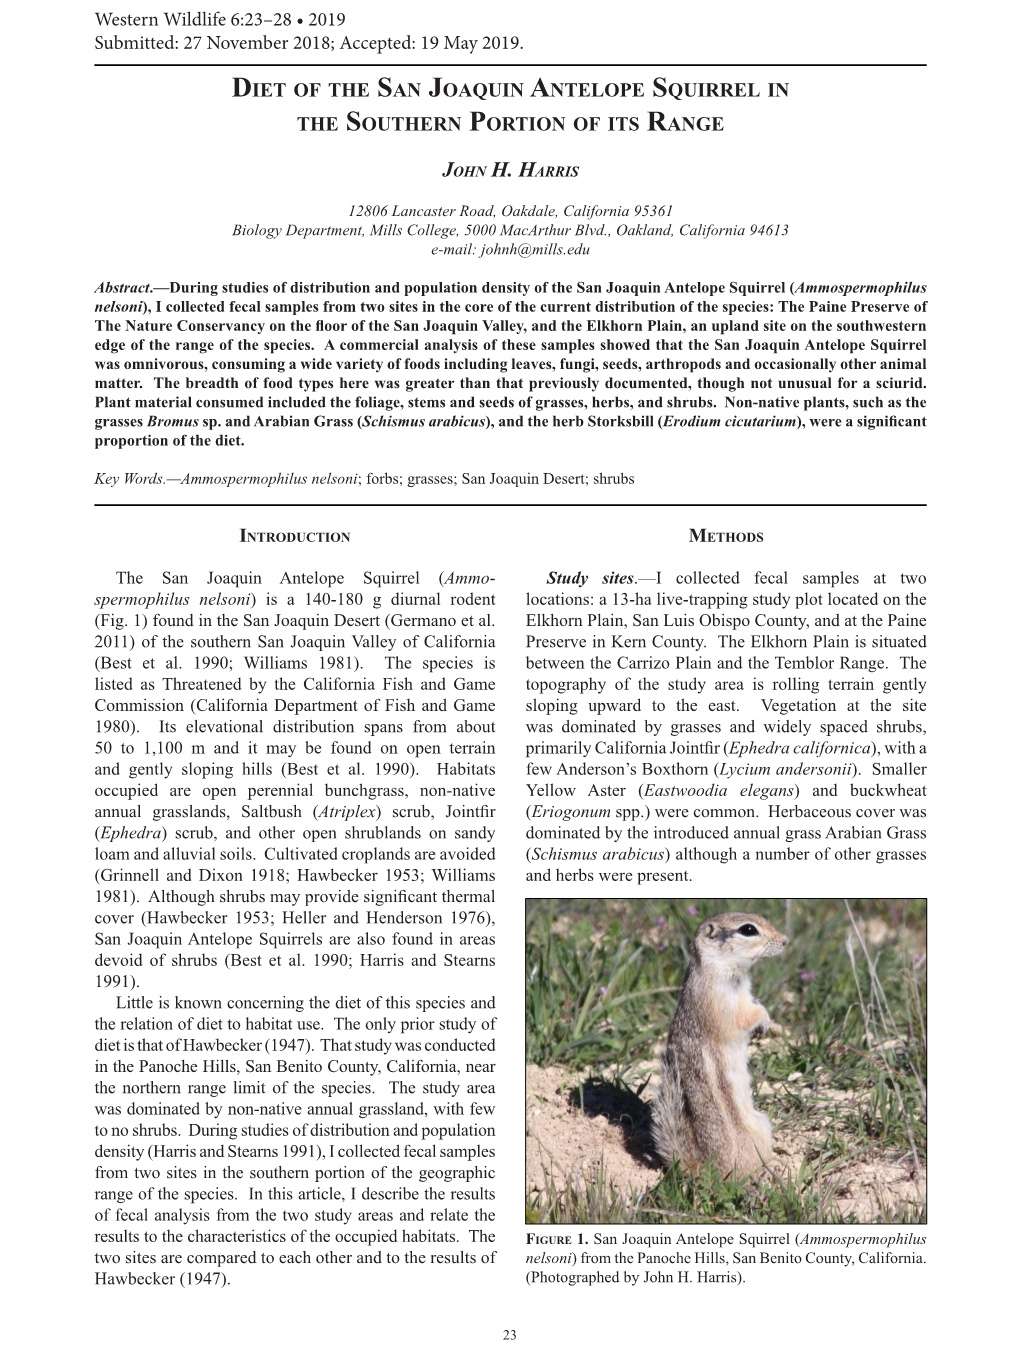 Diet of the San Joaquin Antelope Squirrel in the Southern Portion of Its Range